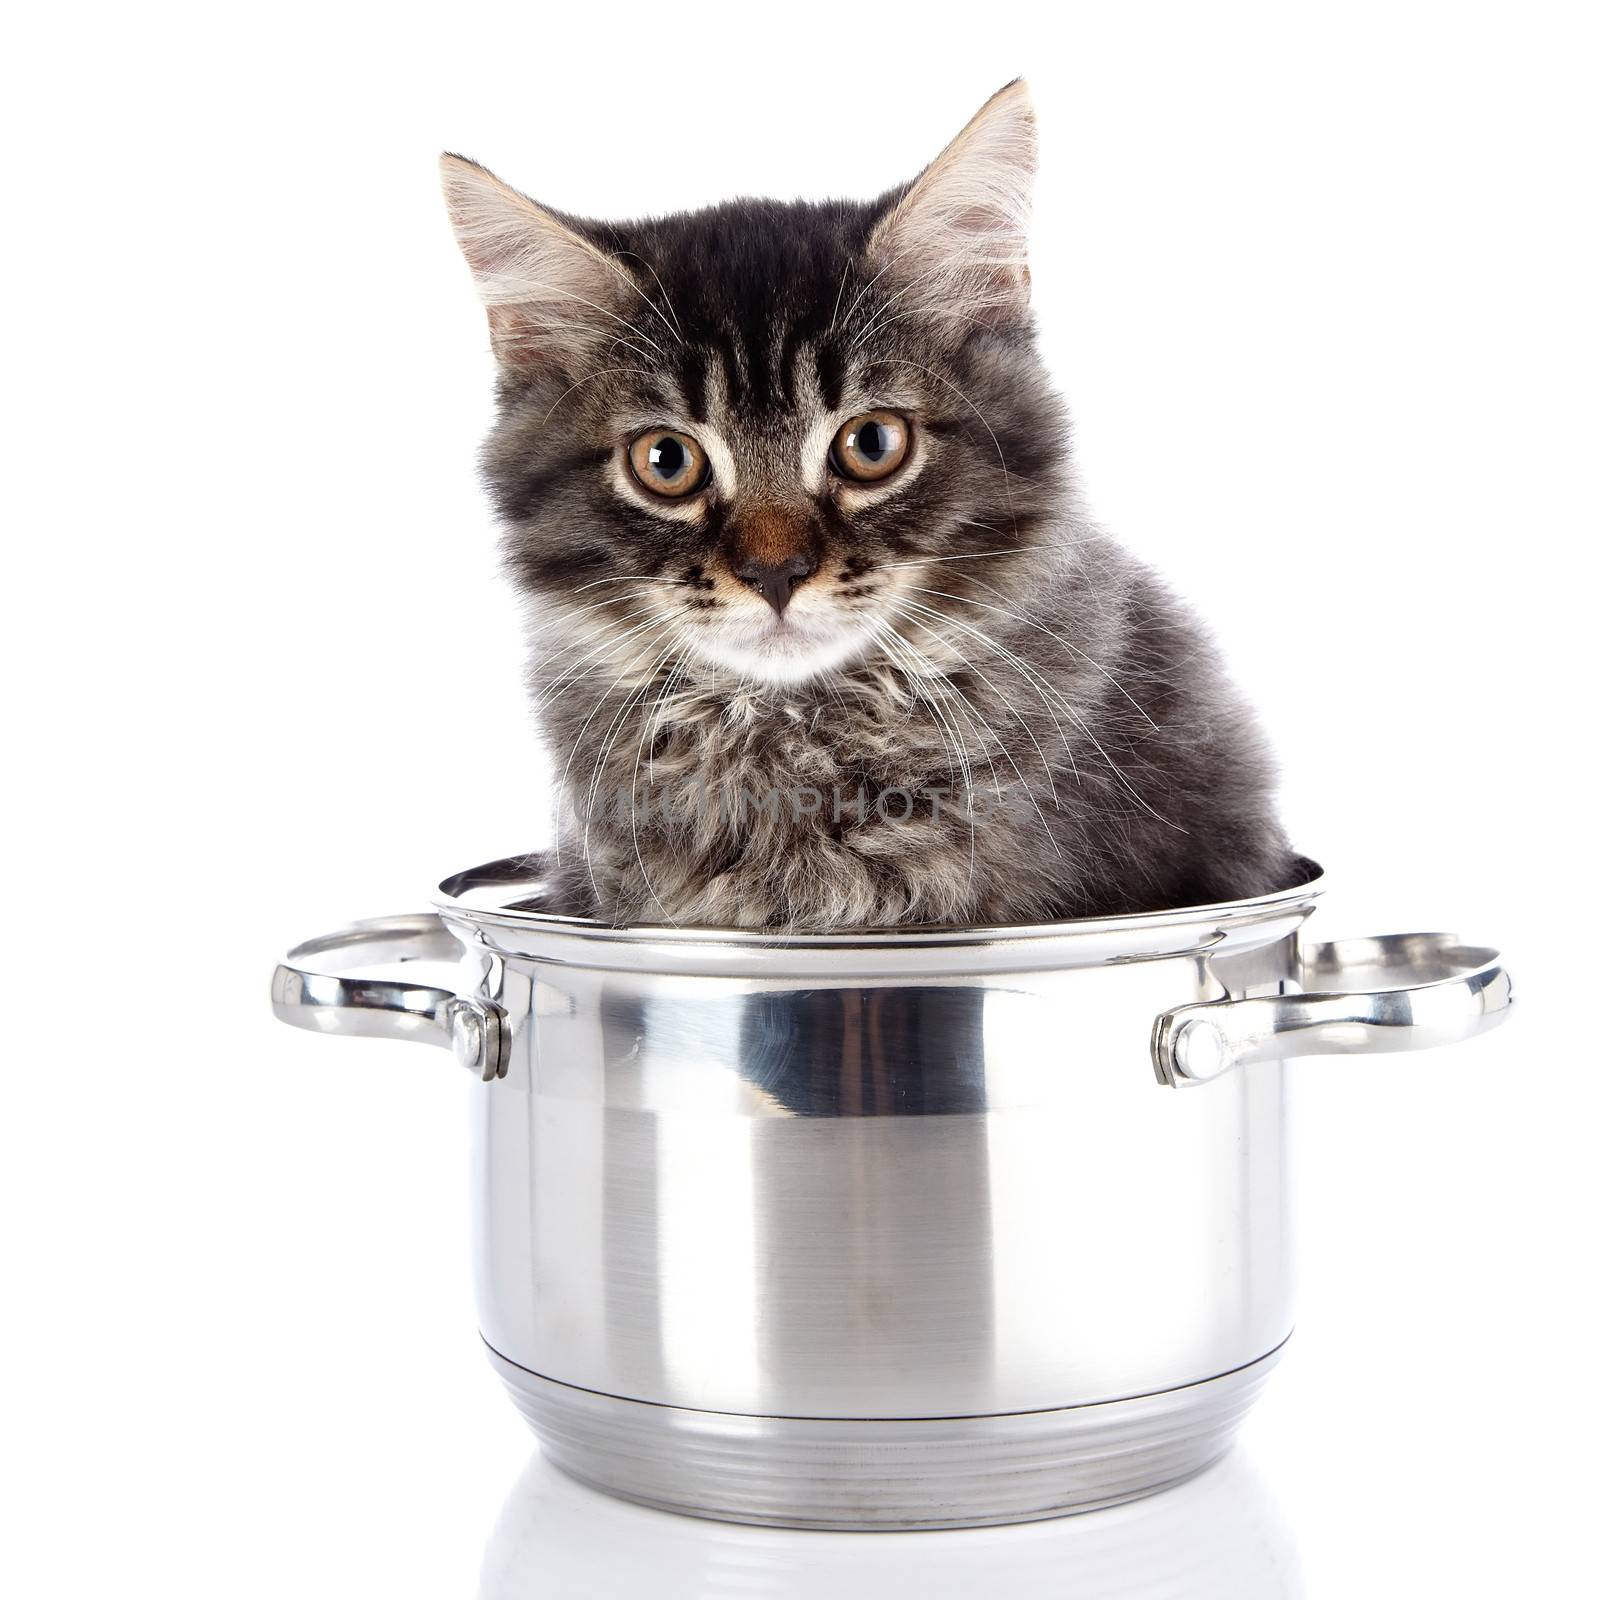 Fluffy cat in a pan.  Striped not purebred kitten. Kitten on a white background. Small predator. Small cat.